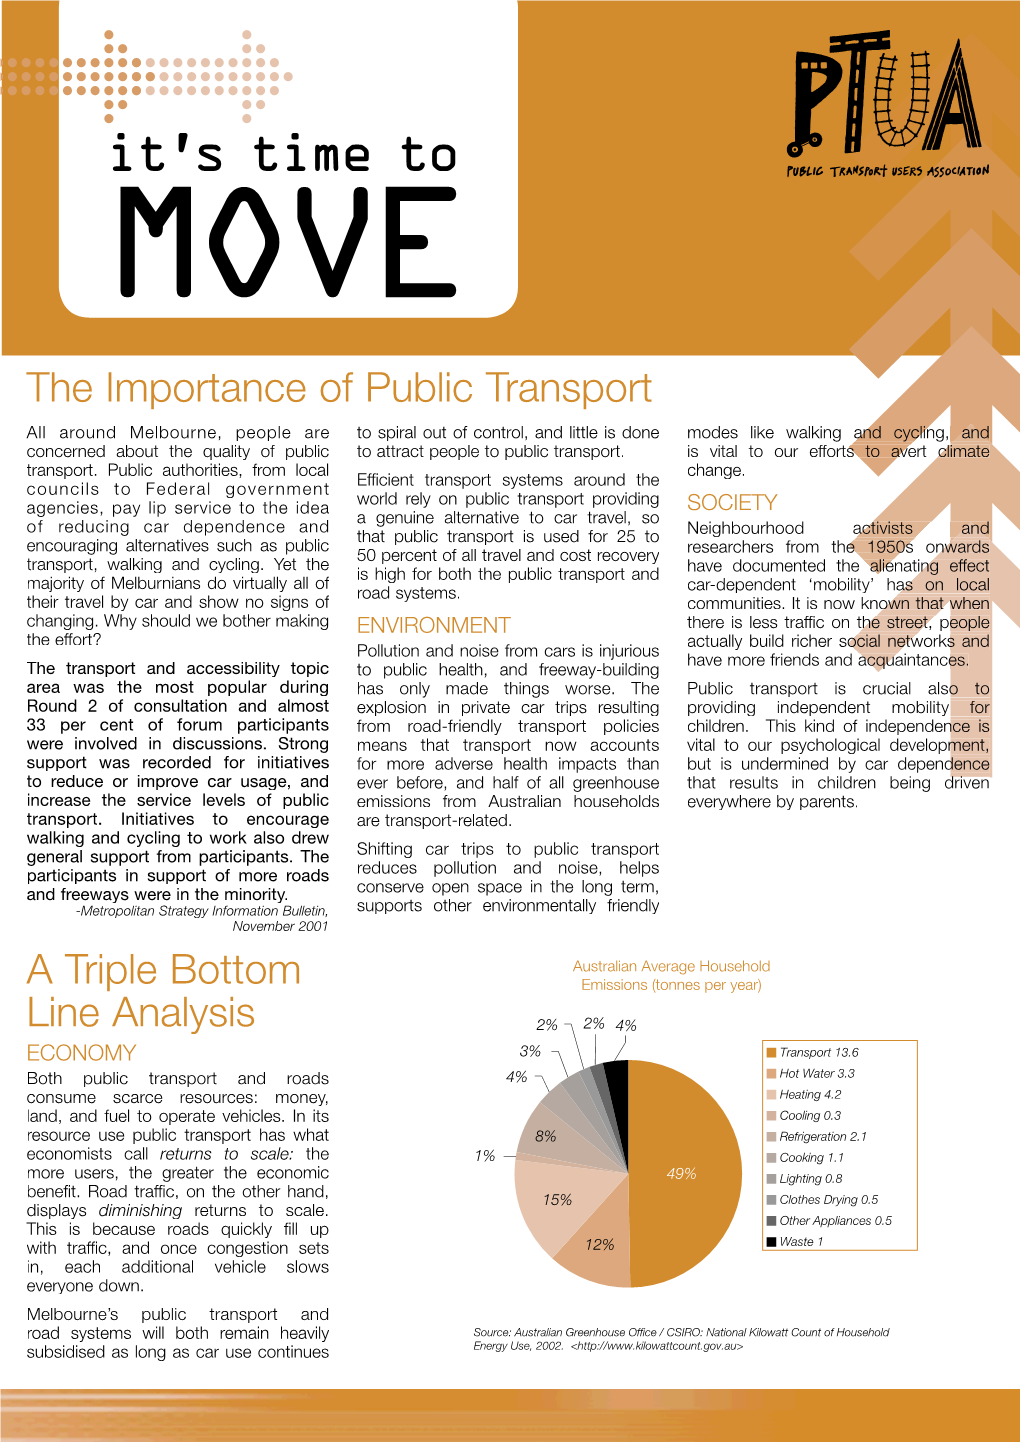 A Triple Bottom Line Analysis the Importance of Public Transport